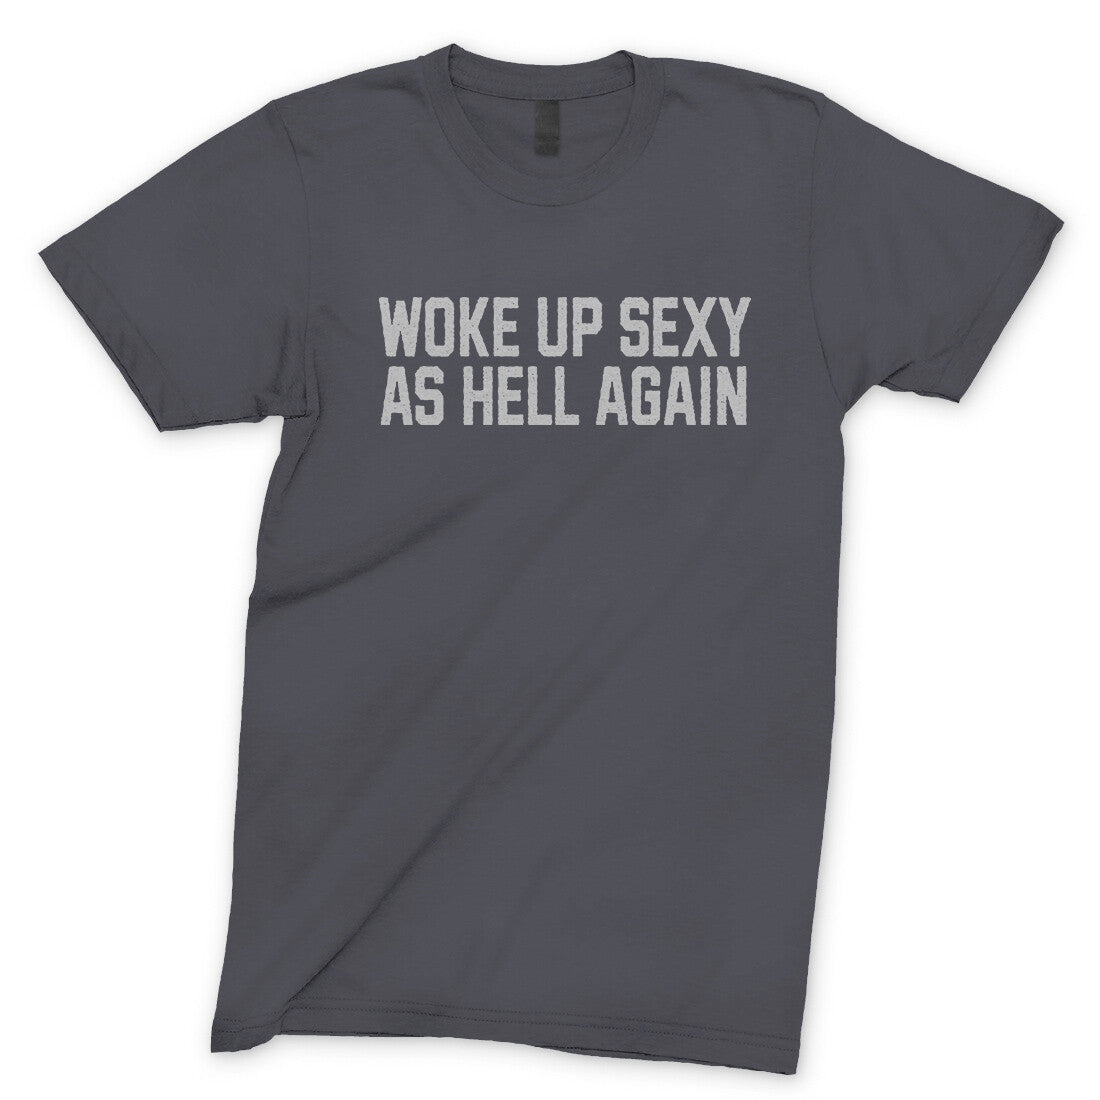 Woke Up Sexy as Hell in Charcoal Color